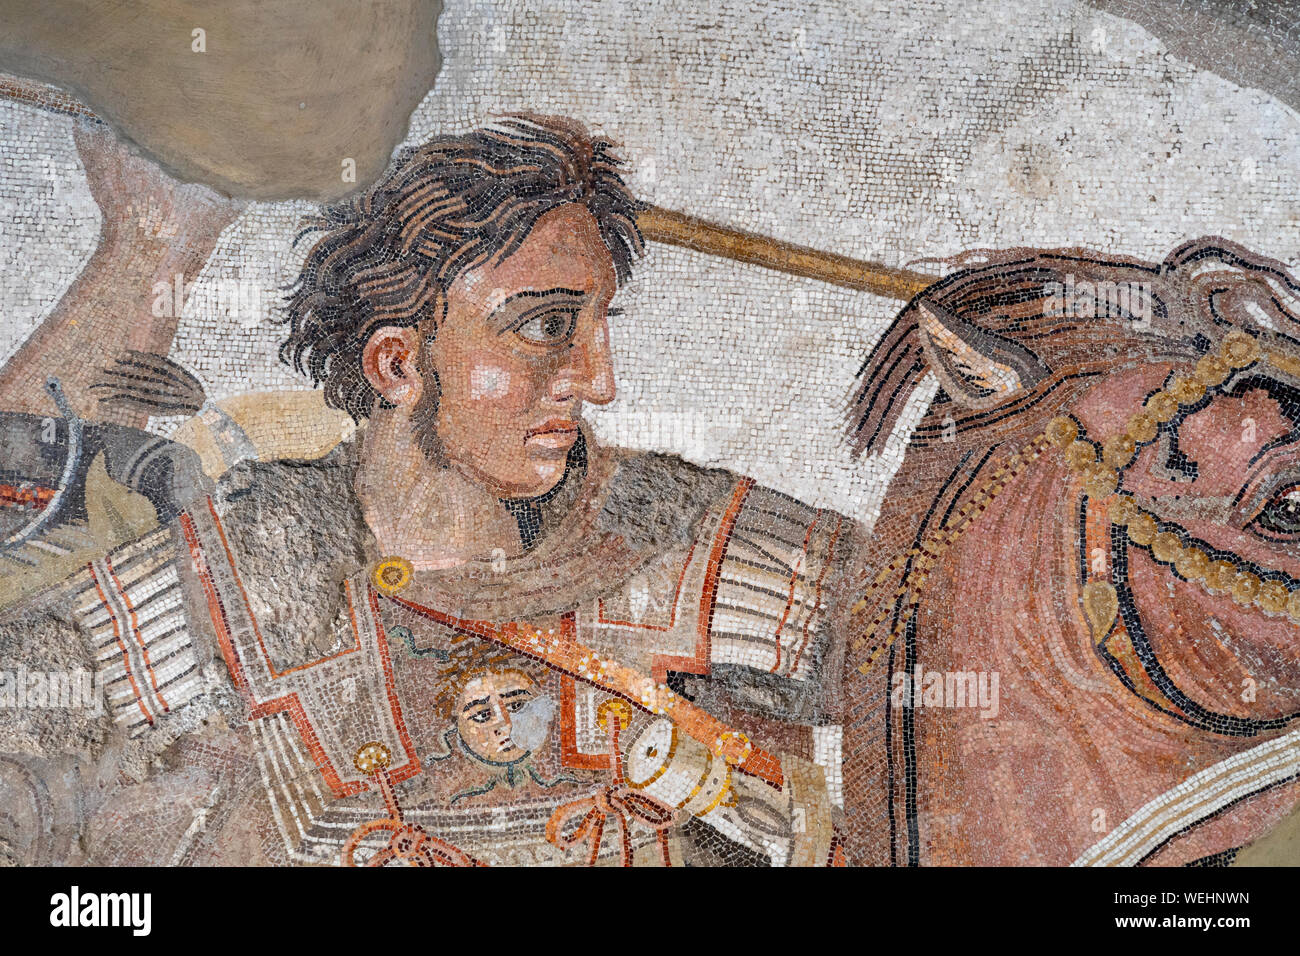 Detail of the Alexander the Great Mosaic depicting Alexander on horseback. Originally from the House of the Faun in Pompeii, now at the Naples Archael Stock Photo